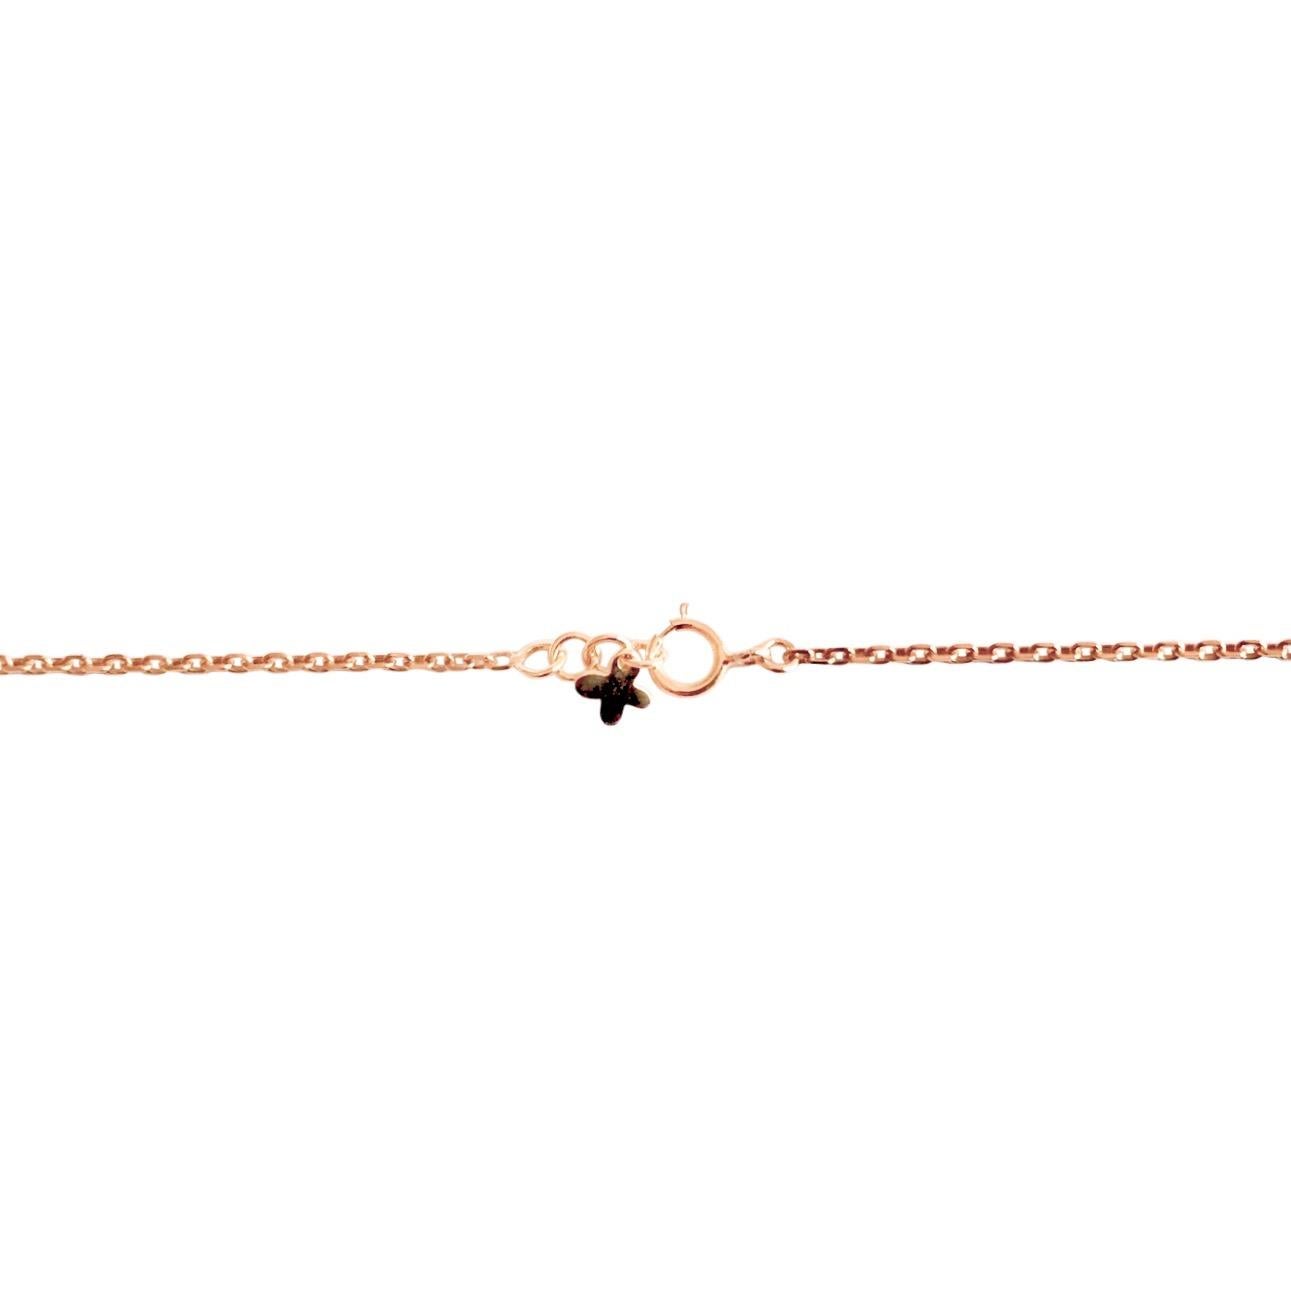 This bracelet which is the symbol of good luck and protection is made of solid 18 Karat yellow gold and set with high-quality white diamonds. 
Total Diamond Carat Weight: 0.11ct / 13 pcs
Hallmark: London Goldsmiths’ Company – Assay Office
All our